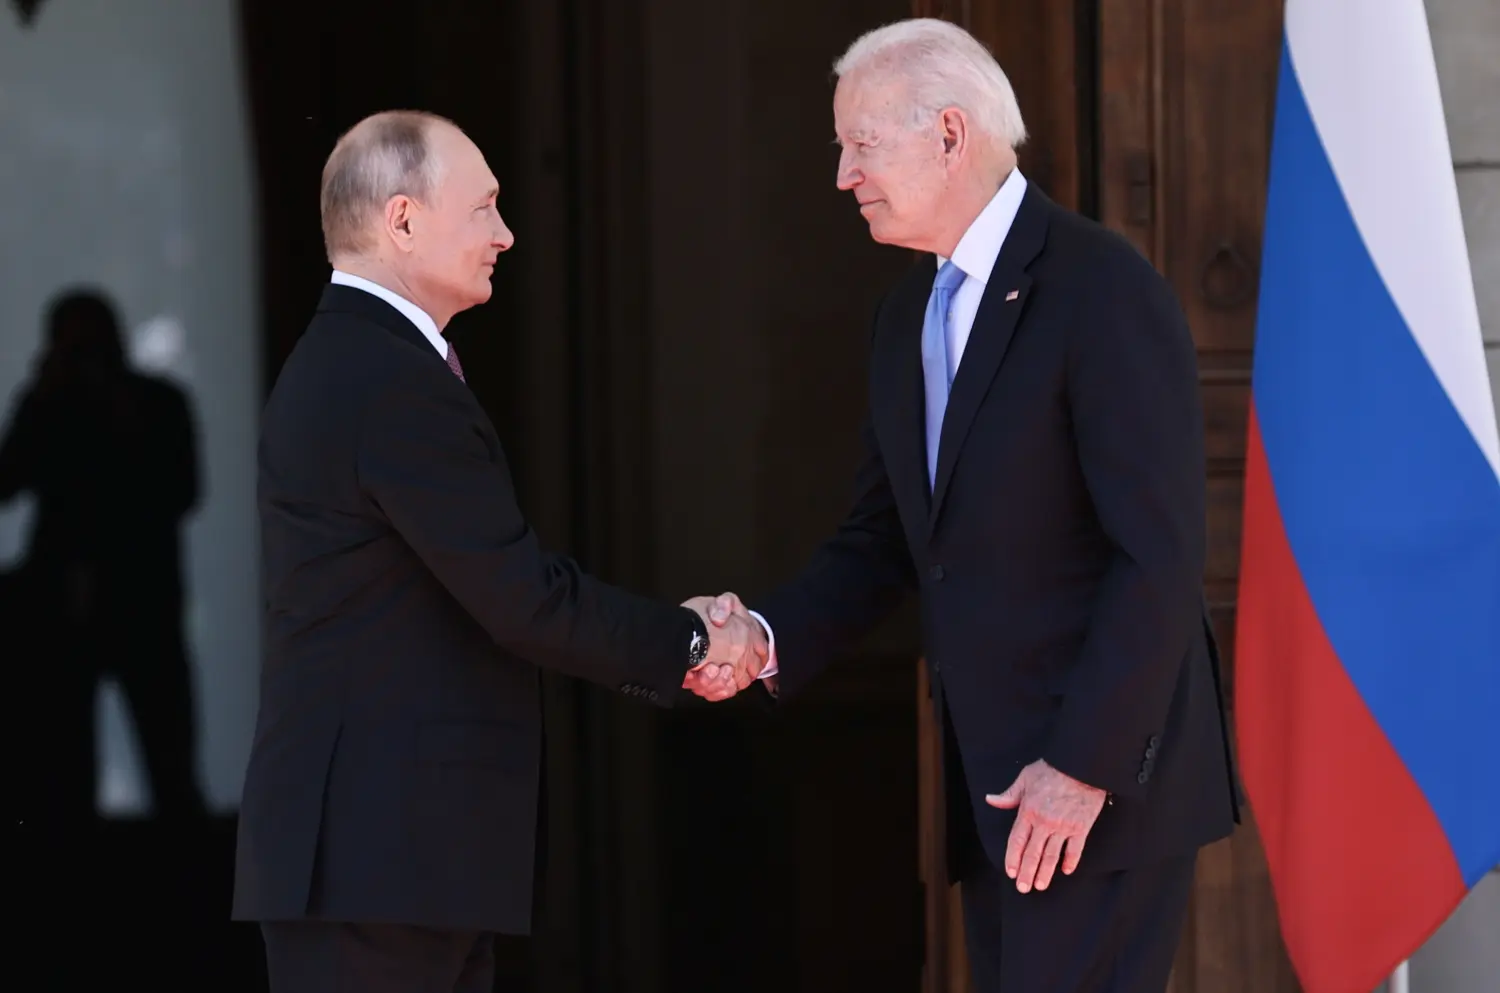 U.S. President Joe Biden and Russia's President Vladimir Putin shake hands as they arrive for the U.S.-Russia summit at Villa La Grange in Geneva, Switzerland June 16, 2021. Sputnik/Sergey Bobylev/Pool via REUTERS ATTENTION EDITORS - THIS IMAGE WAS PROVIDED BY A THIRD PARTY.